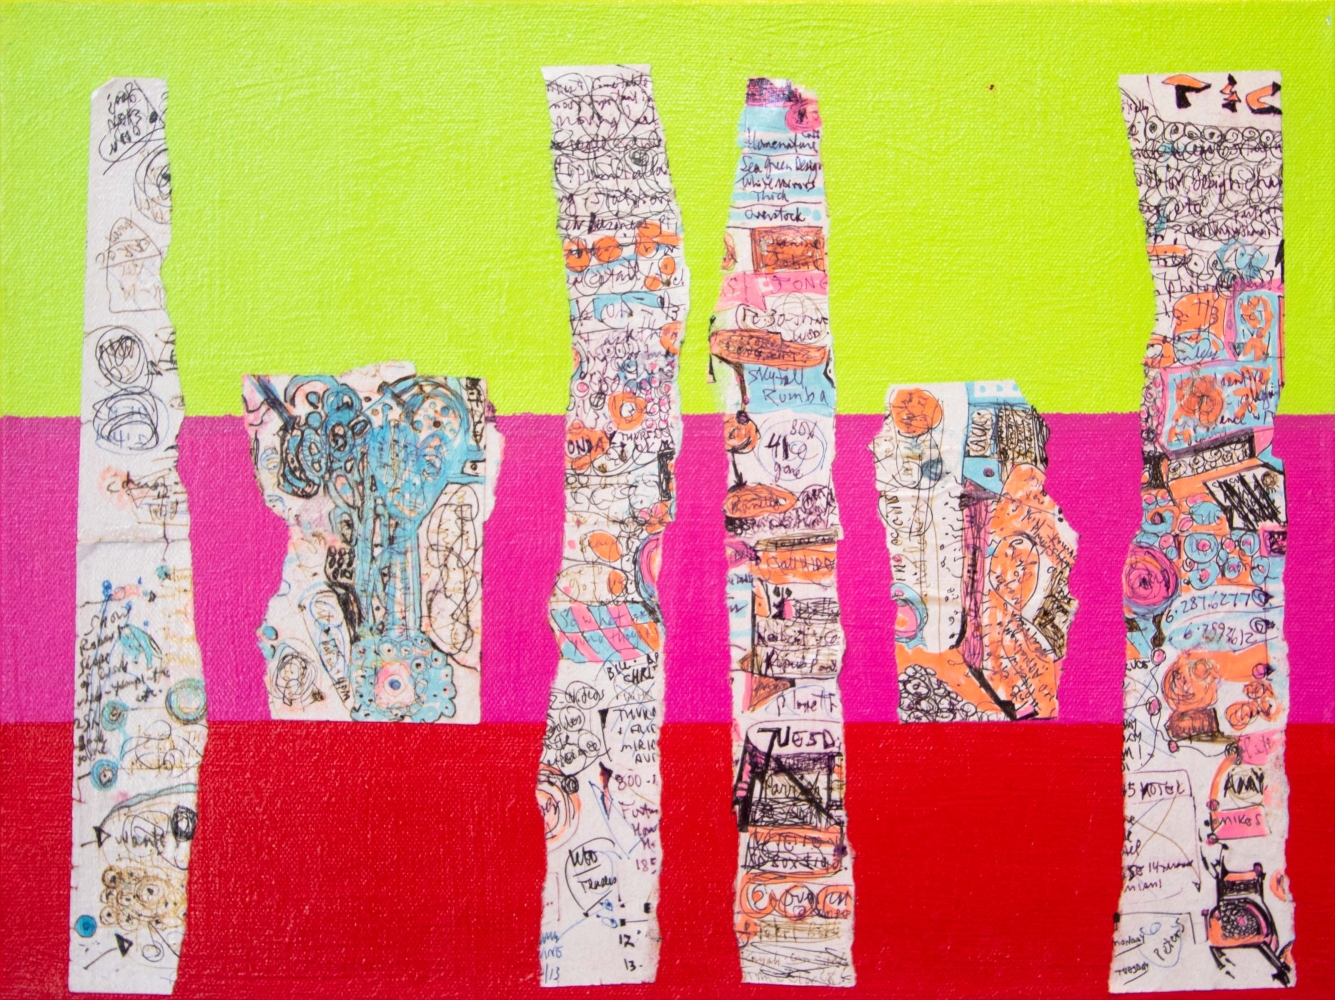 Ron Burkhardt, NOTISM- "Spires" 2013. Acrylics, Pen and Ink on Paper Collaged on Canvas, 12 x 16 inches